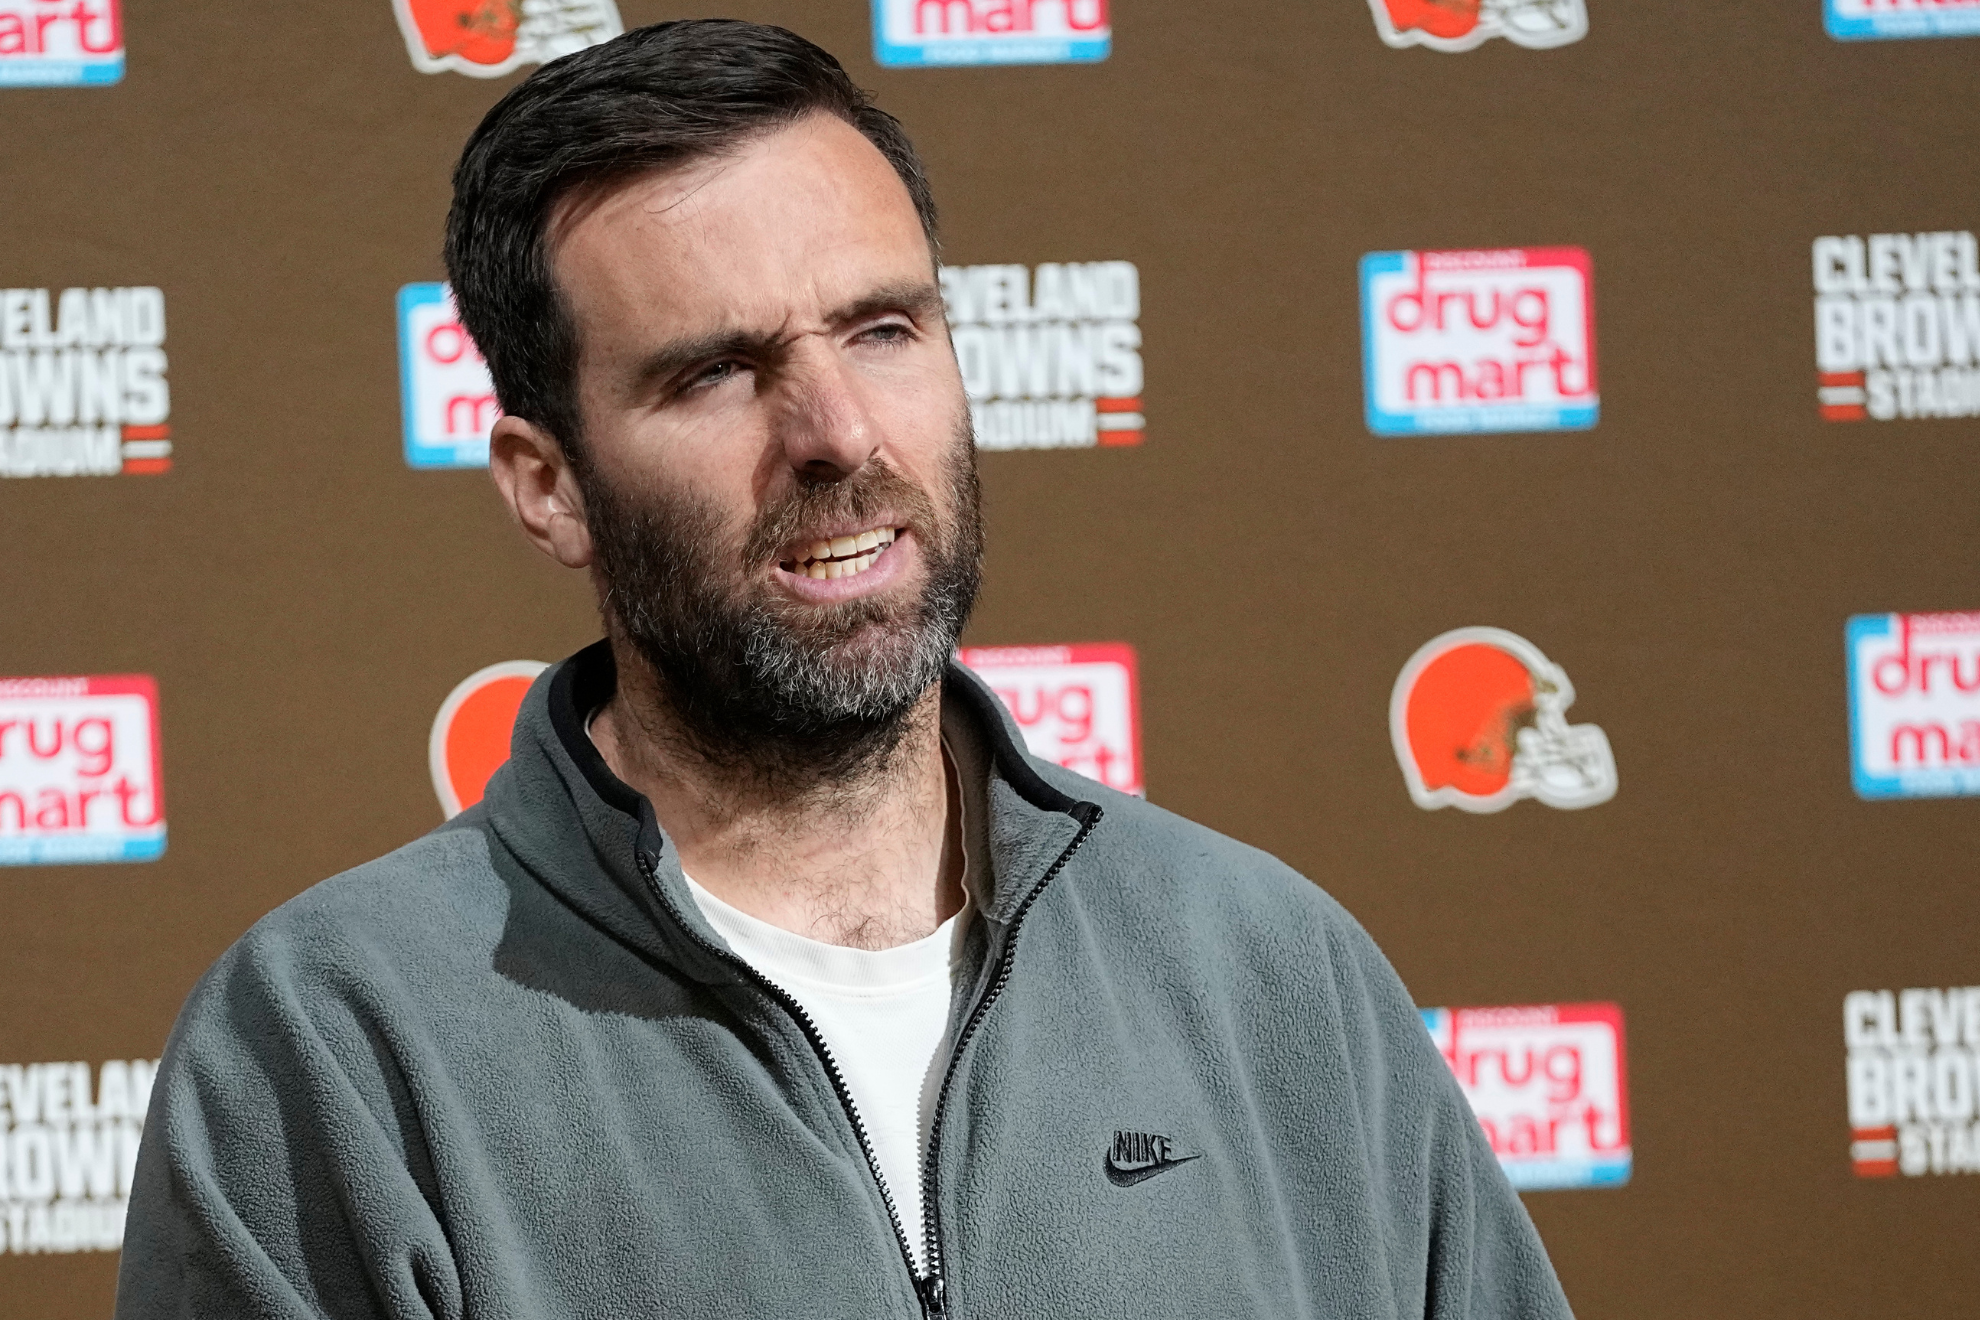 Grizzled veteran Flacco has been signed off the street and could end up tossing passes for the Browns in the playoffs.